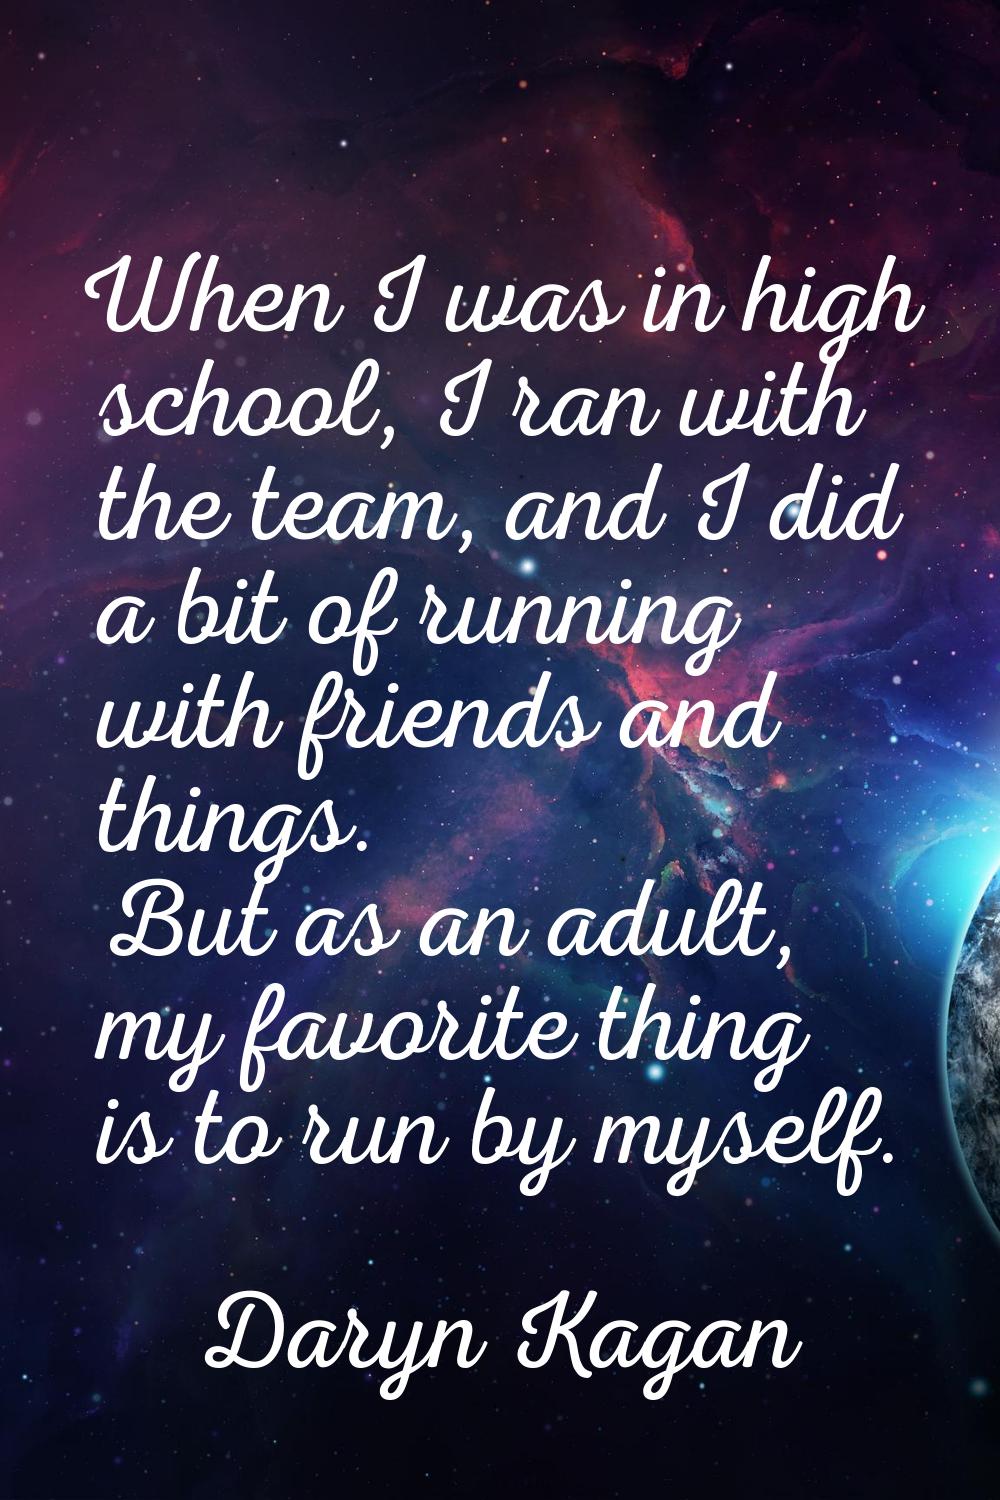 When I was in high school, I ran with the team, and I did a bit of running with friends and things.